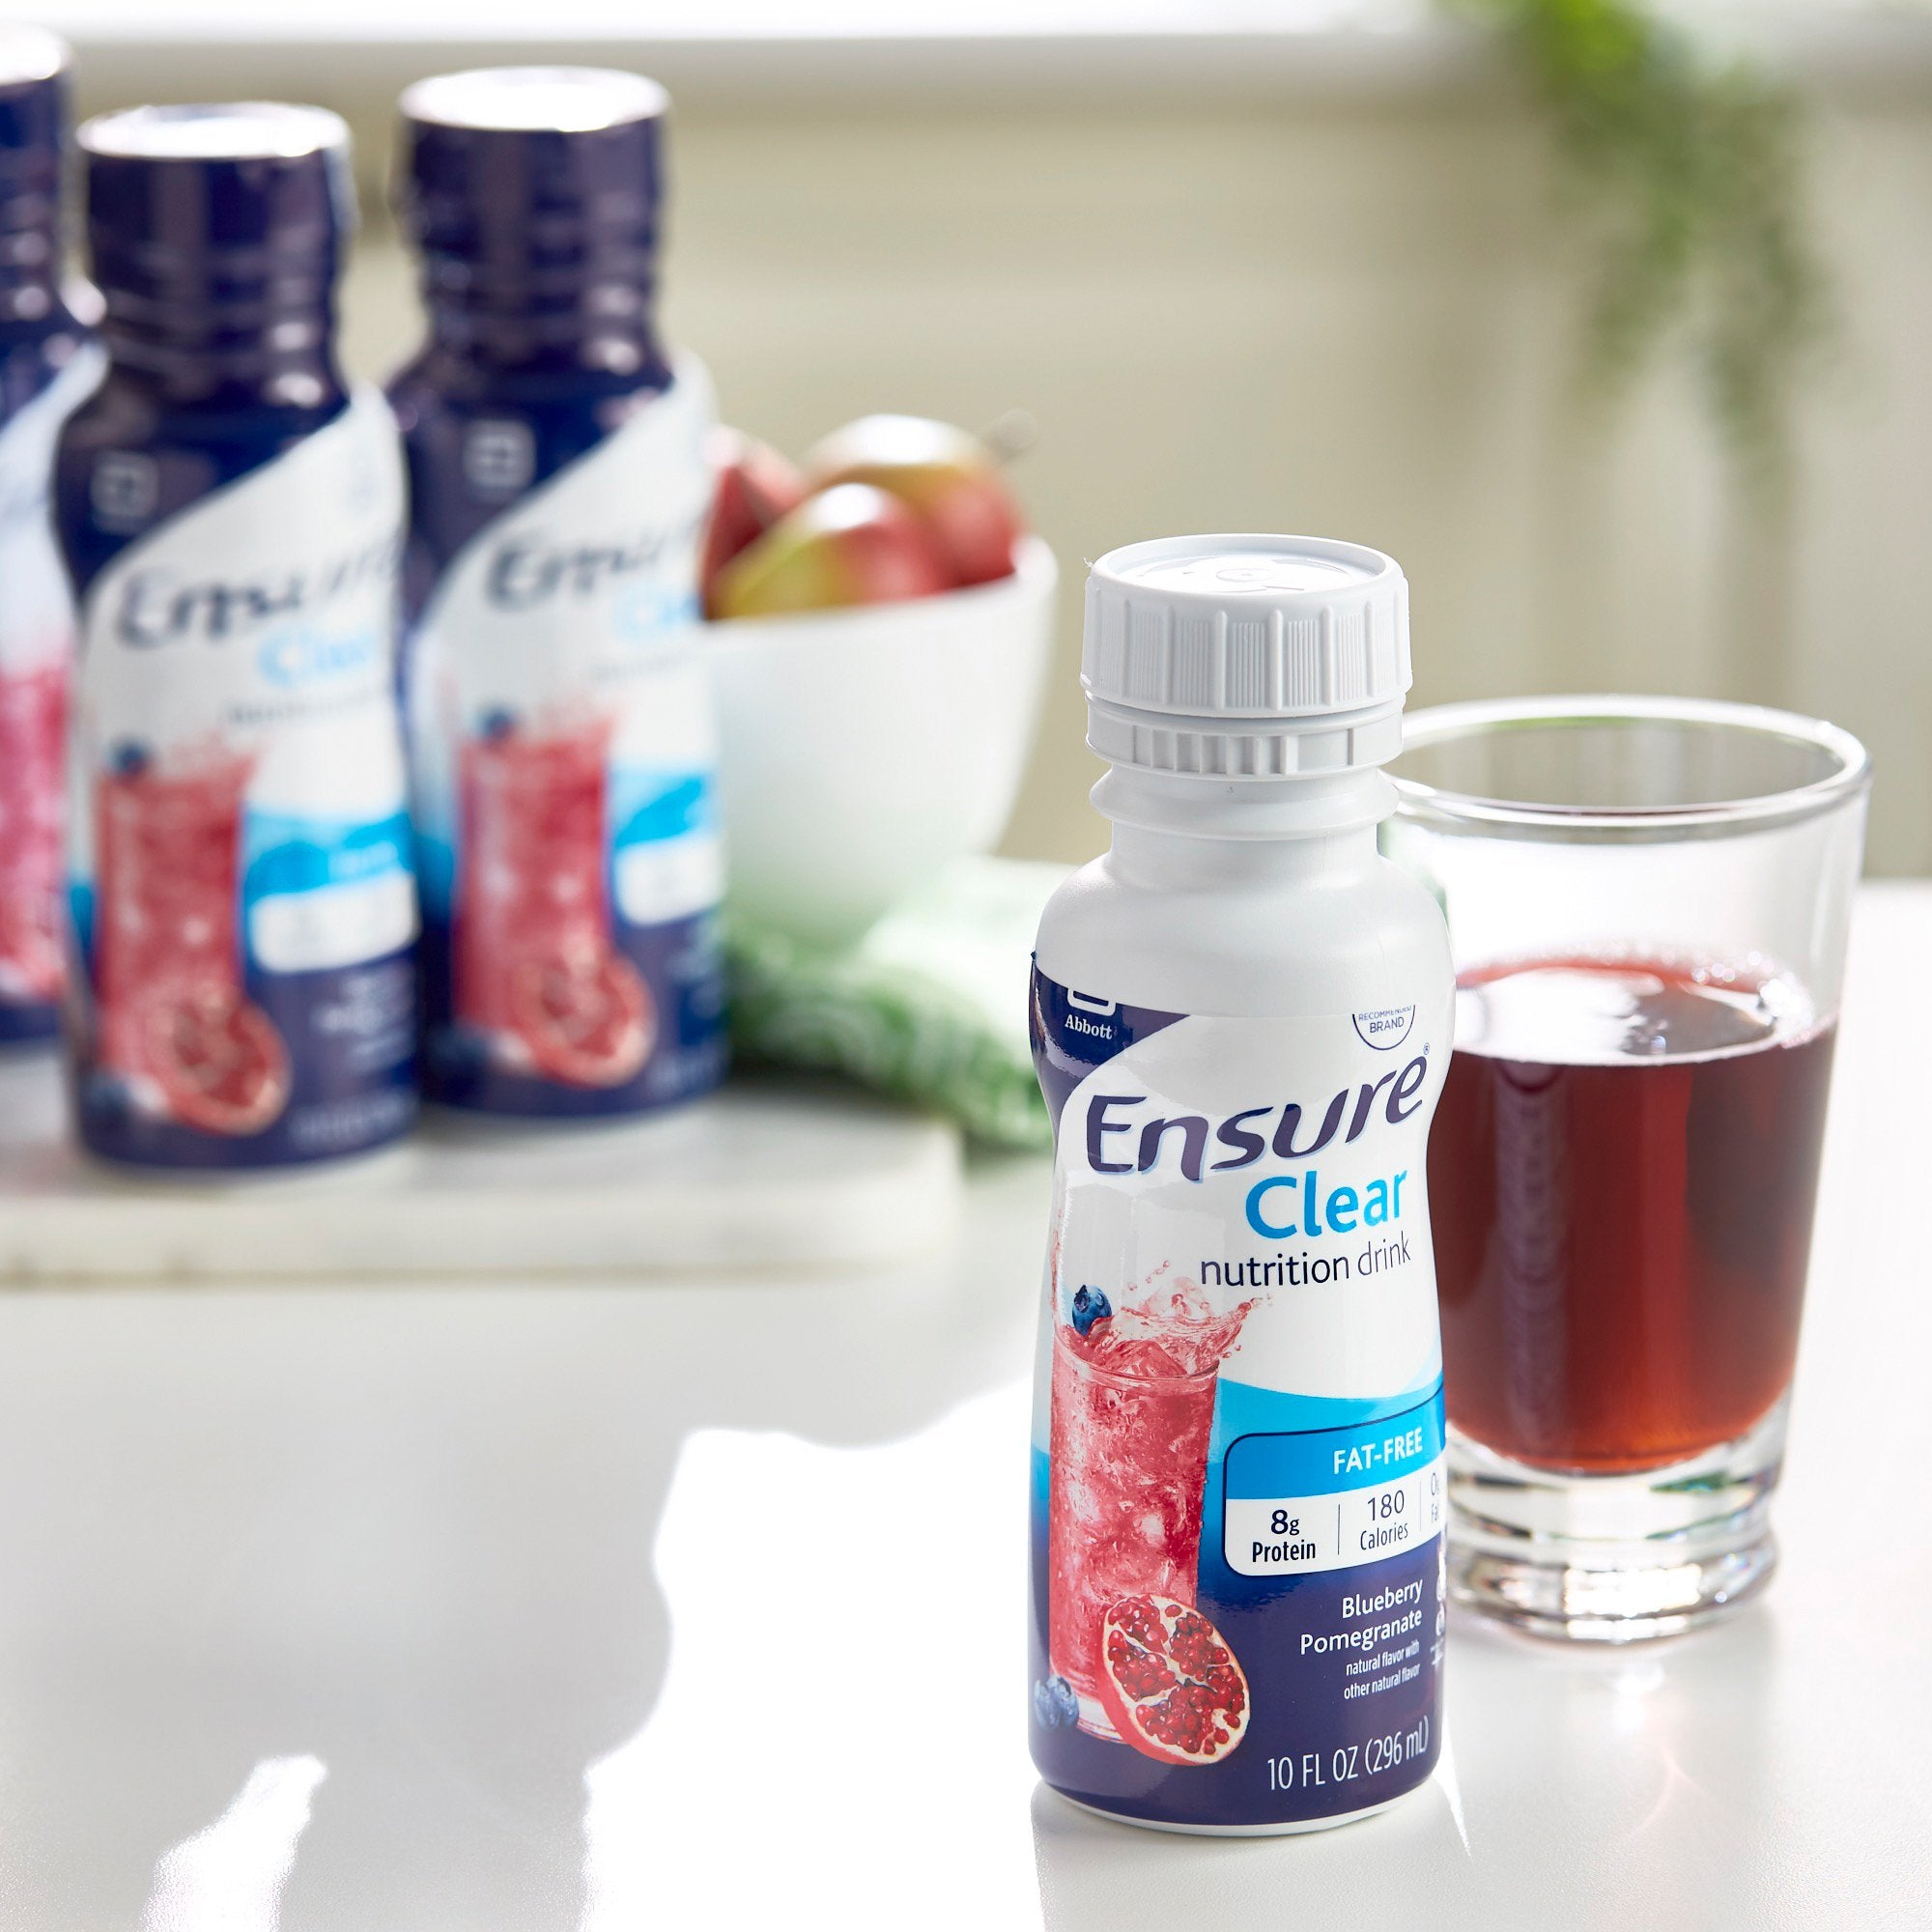 Ensure® Clear Nutrition Drink in Blueberry Pomegranate